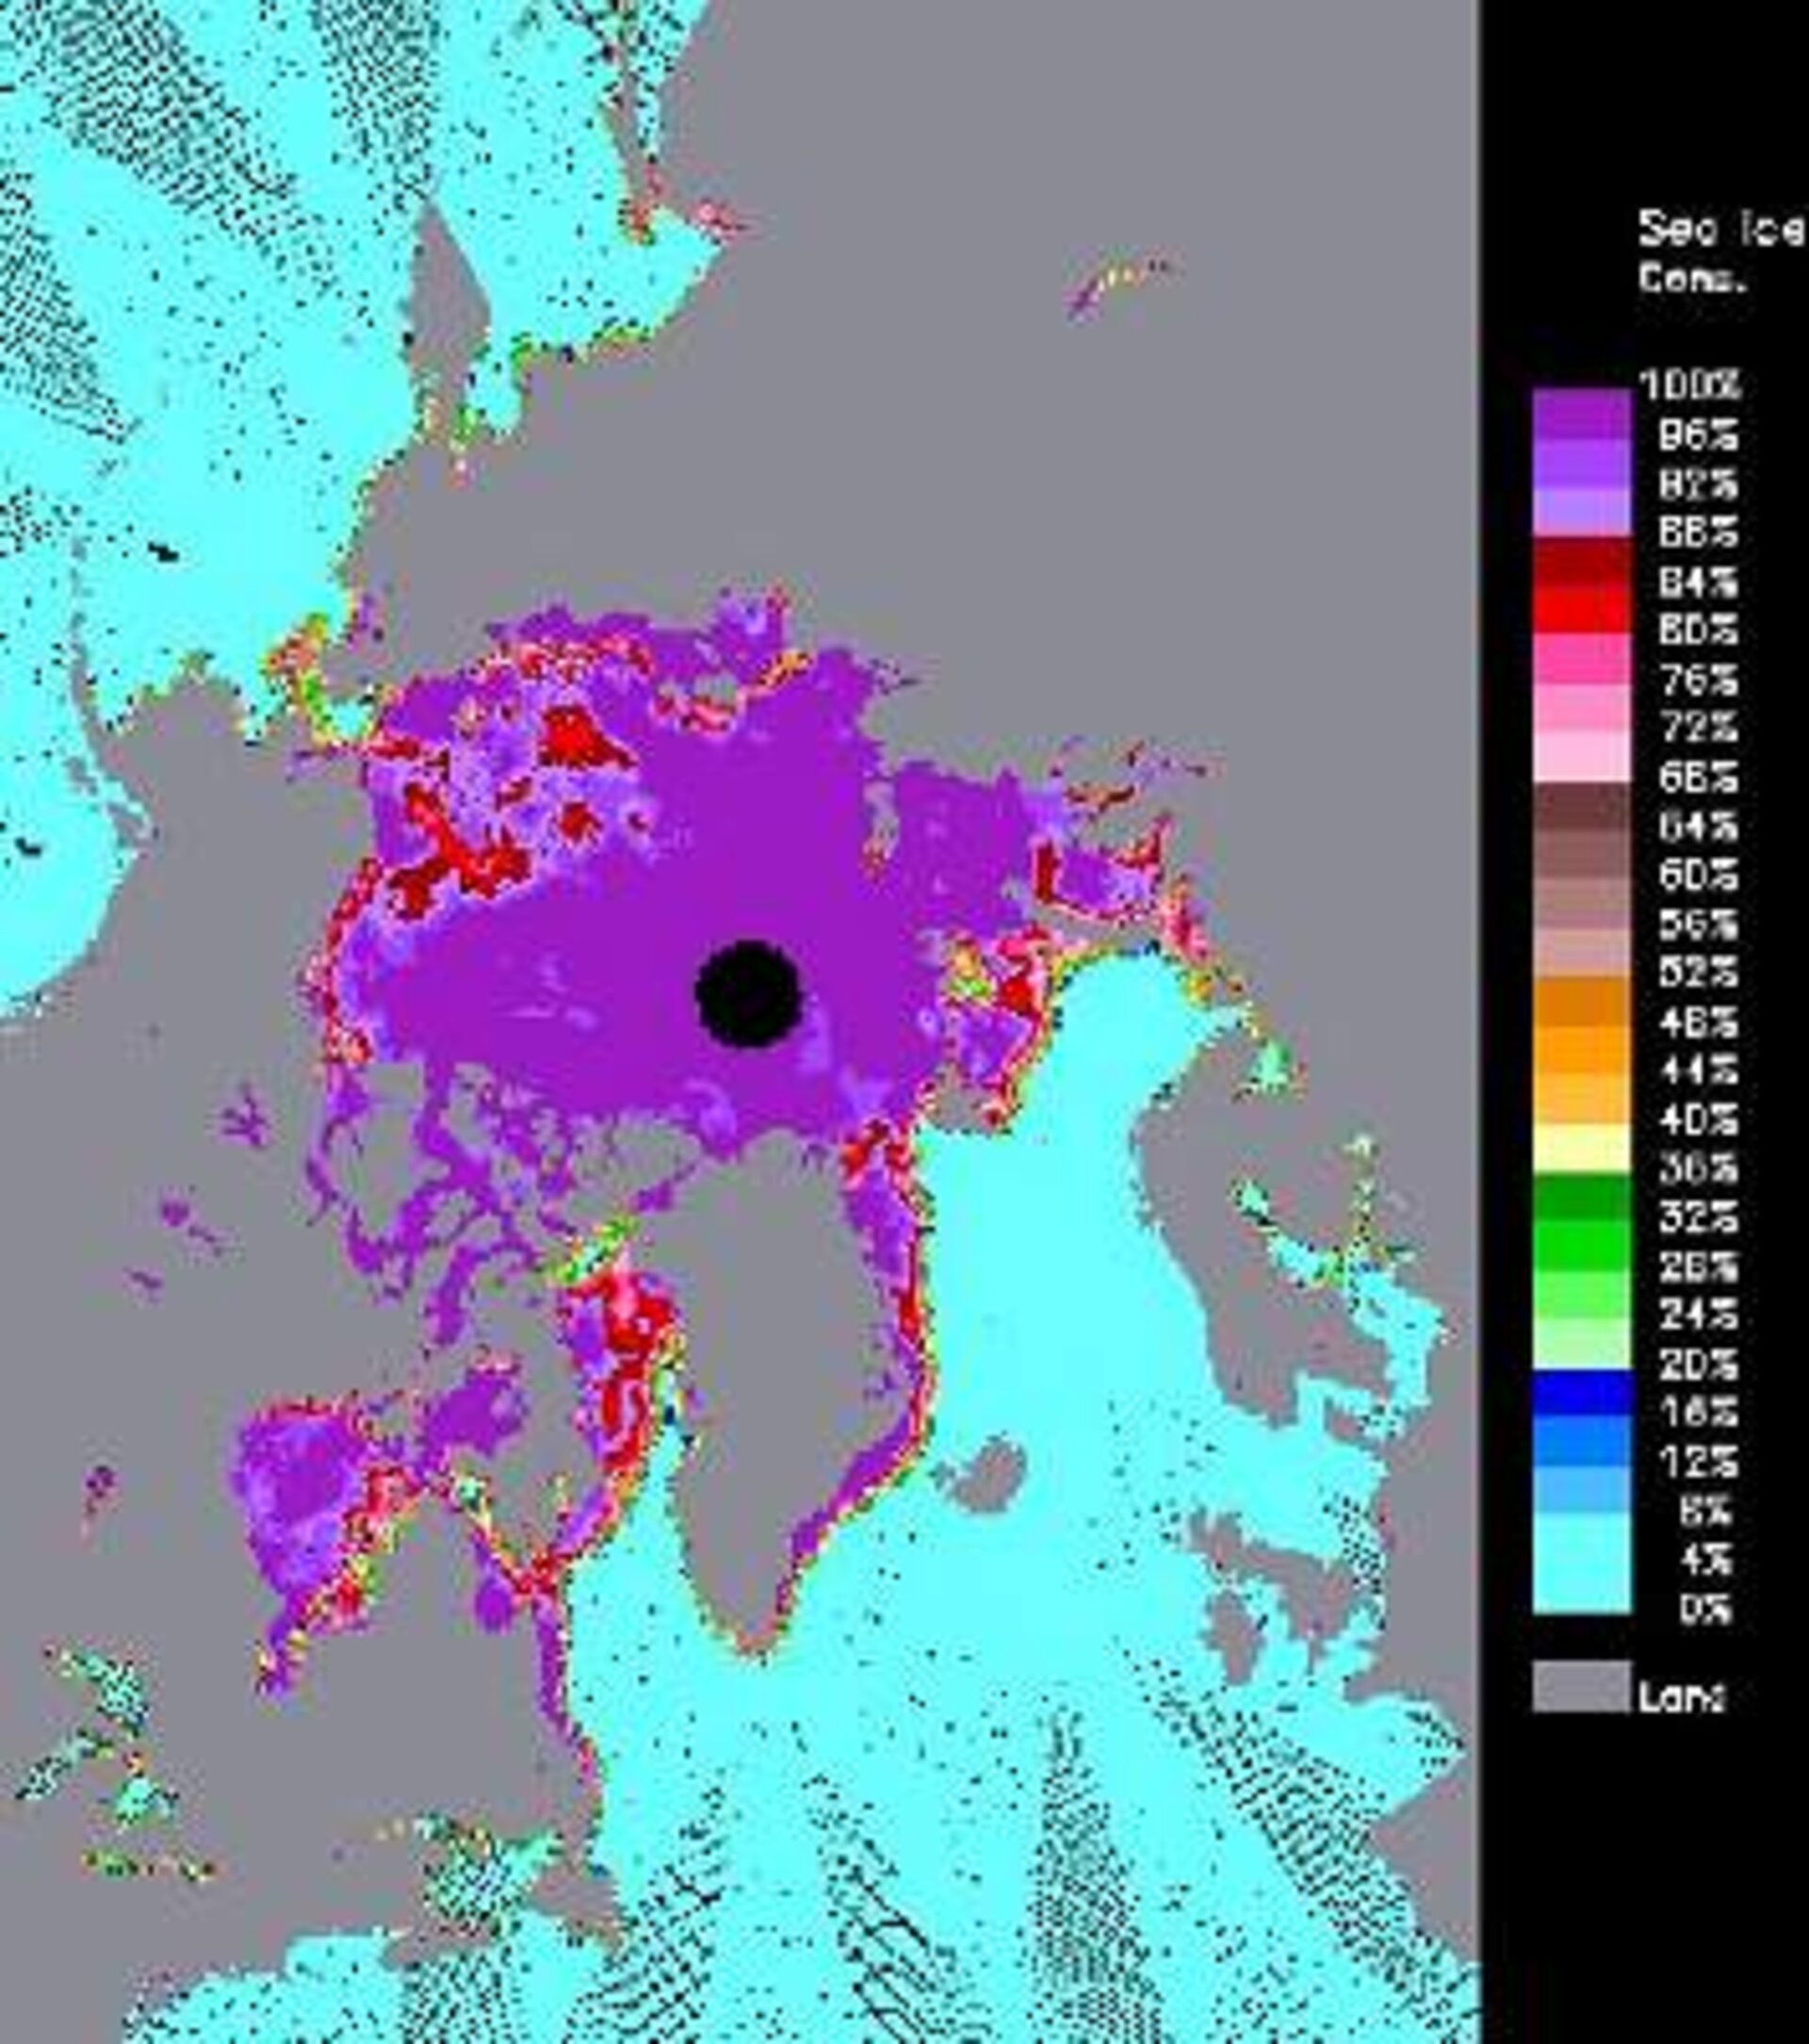 Arctic sea ice concentration on 20 May 2002 during the LaRA campaign in northern Greenland